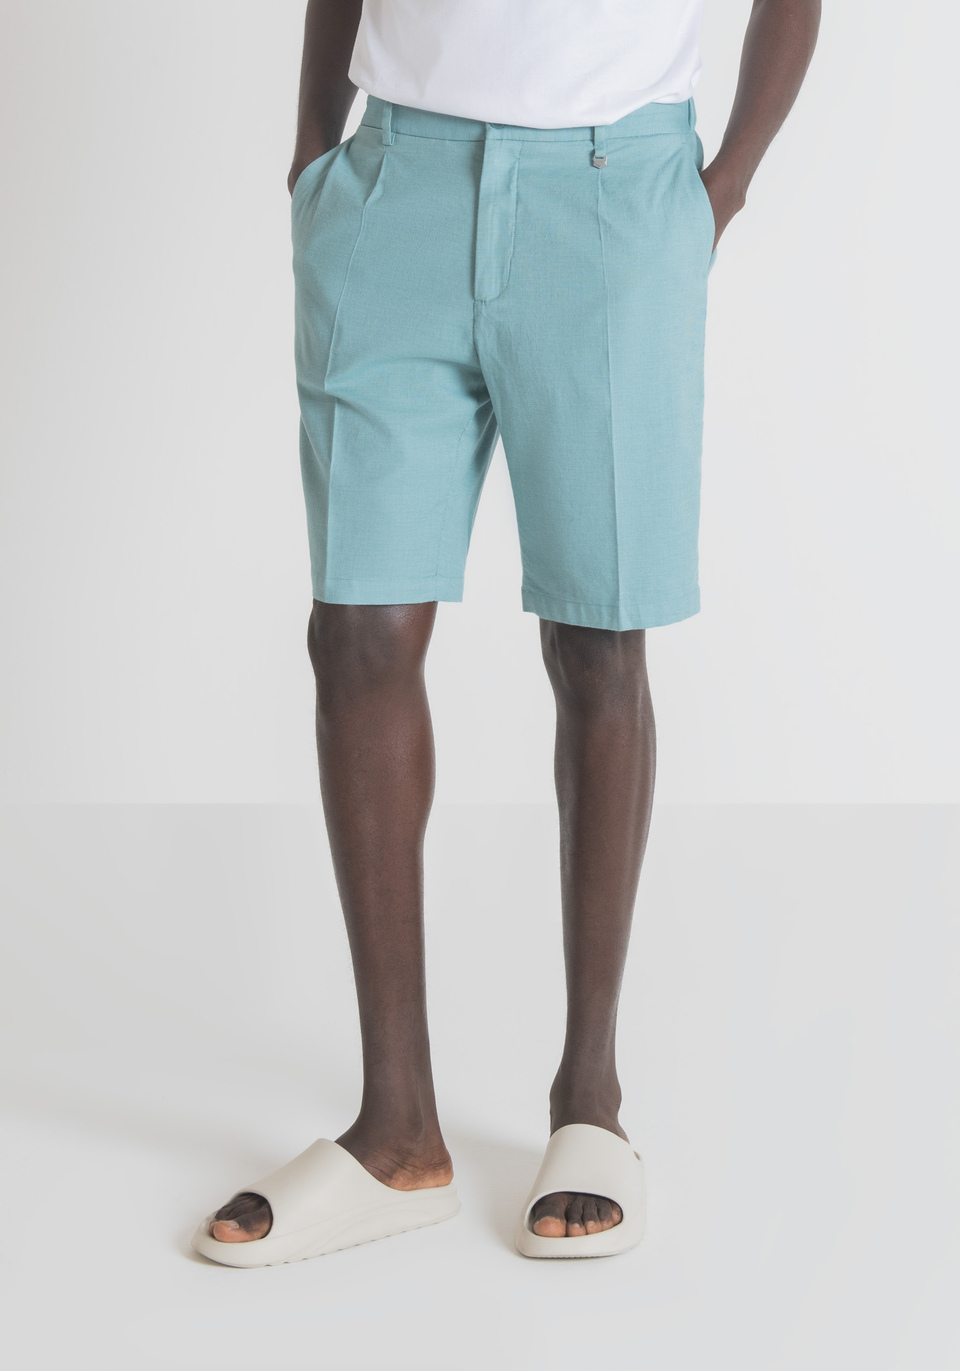 "GUSTAF" CARROT-FIT SHORTS IN YARN-DYED STRETCH COTTON - Antony Morato Online Shop